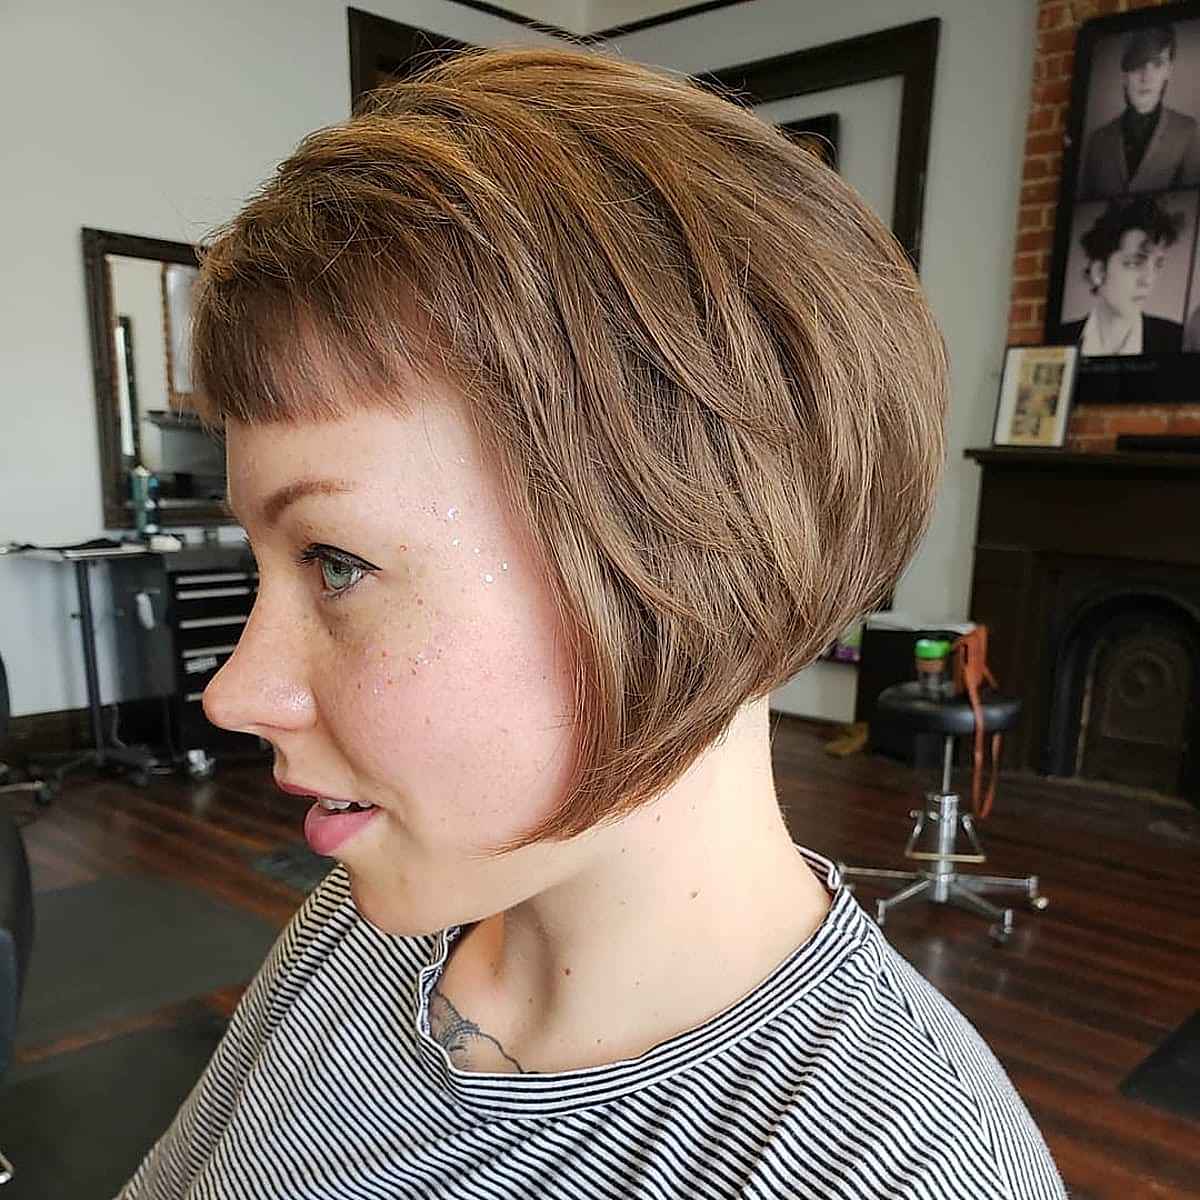 21 Short, Stacked Inverted Bob Haircut Ideas to Spice Up Your Style